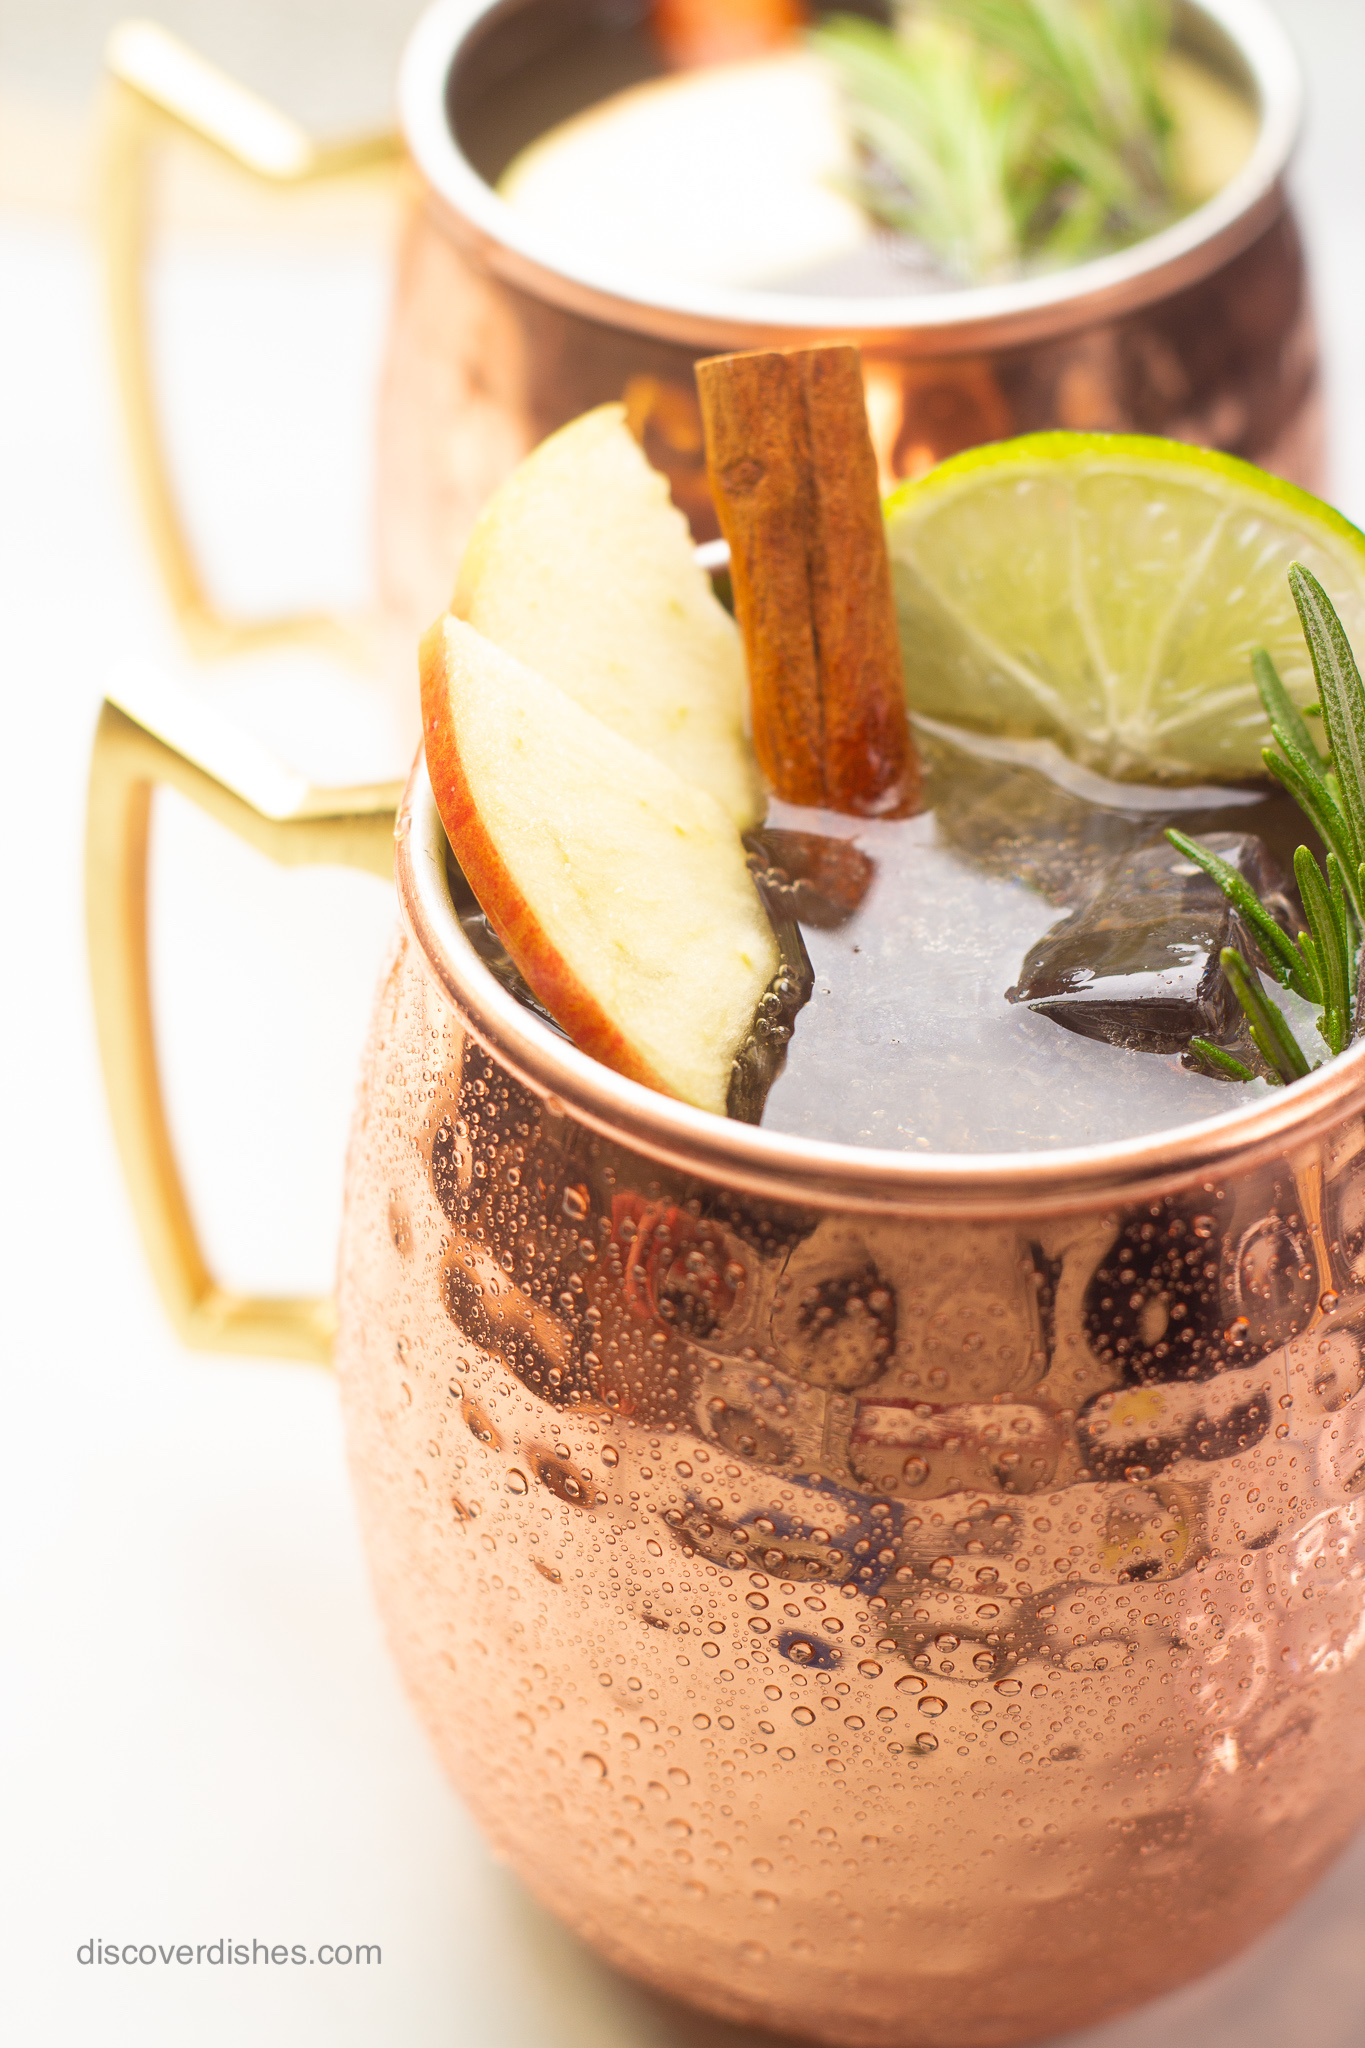 Apple Cider Moscow Mules